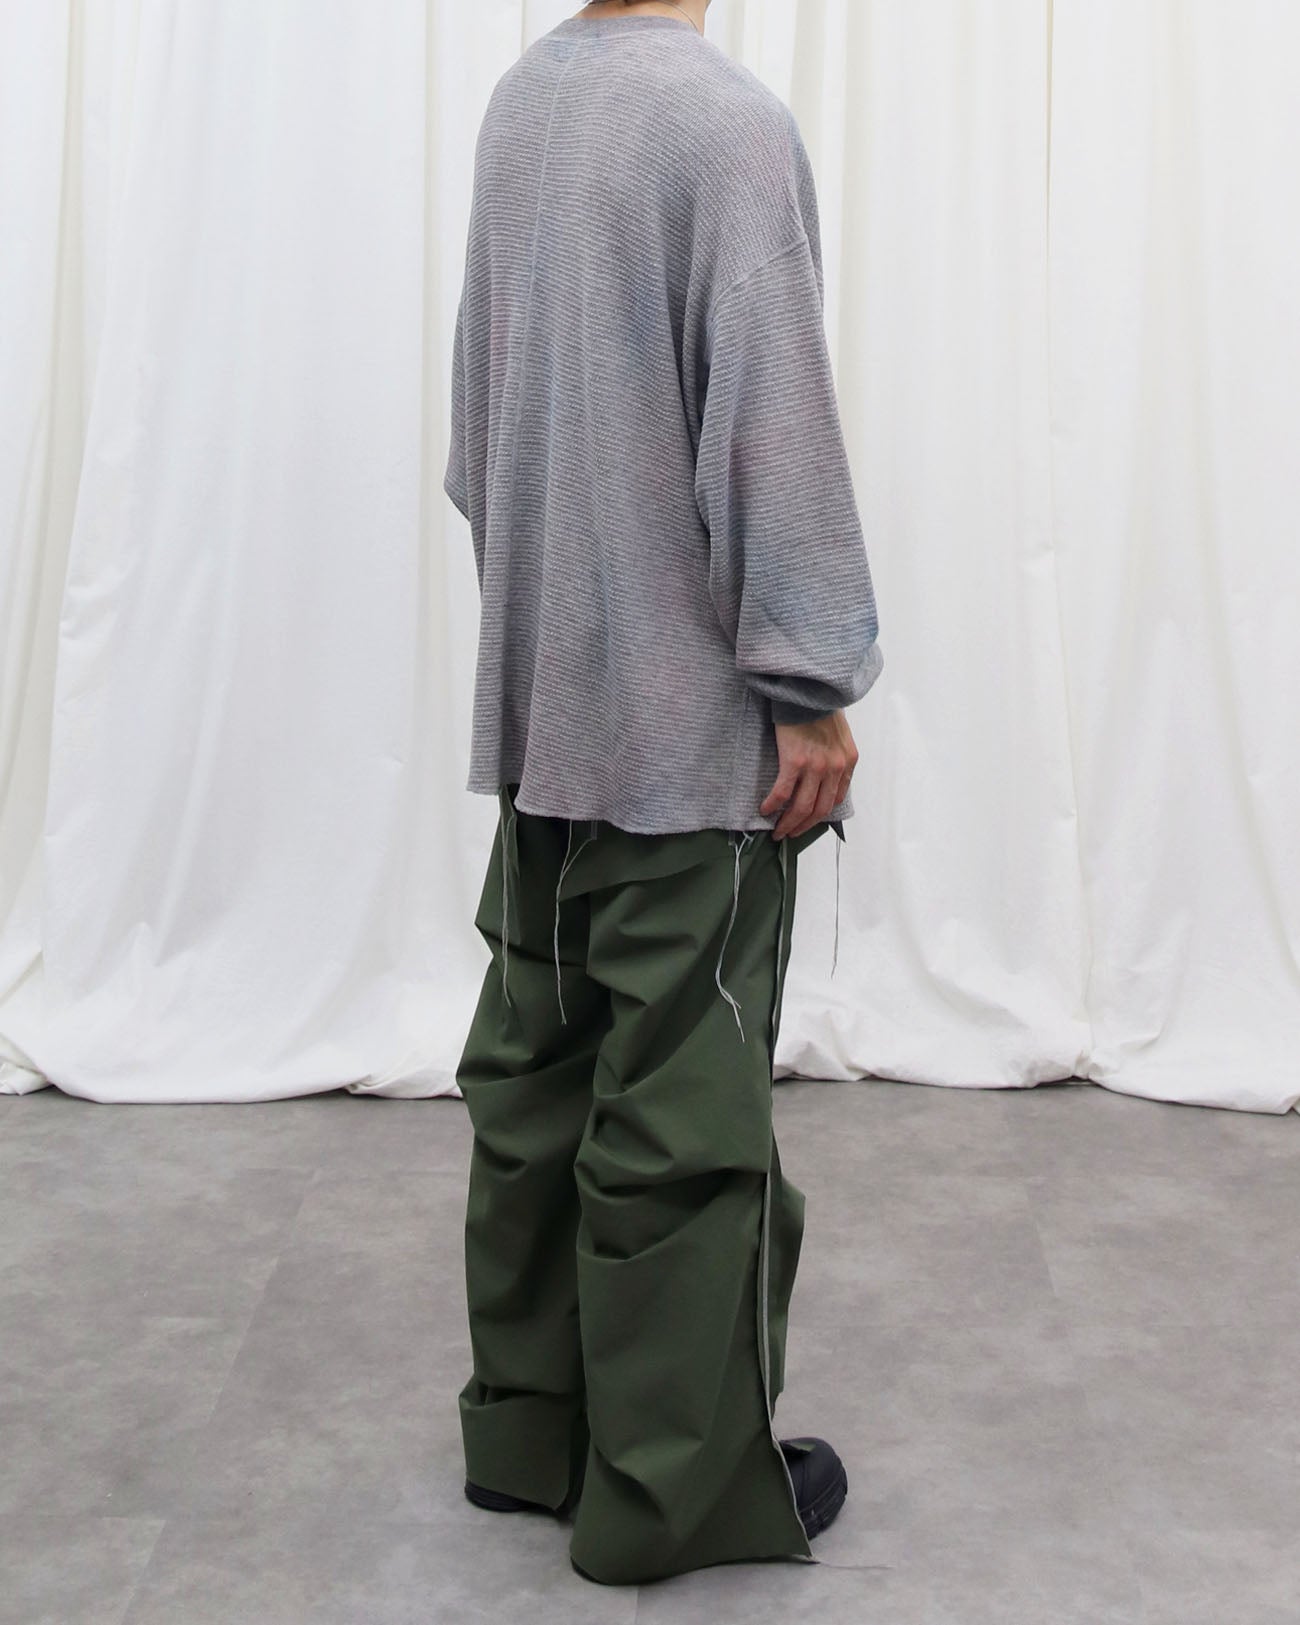 Two Fade Yak/Co Thermal L/S - gray